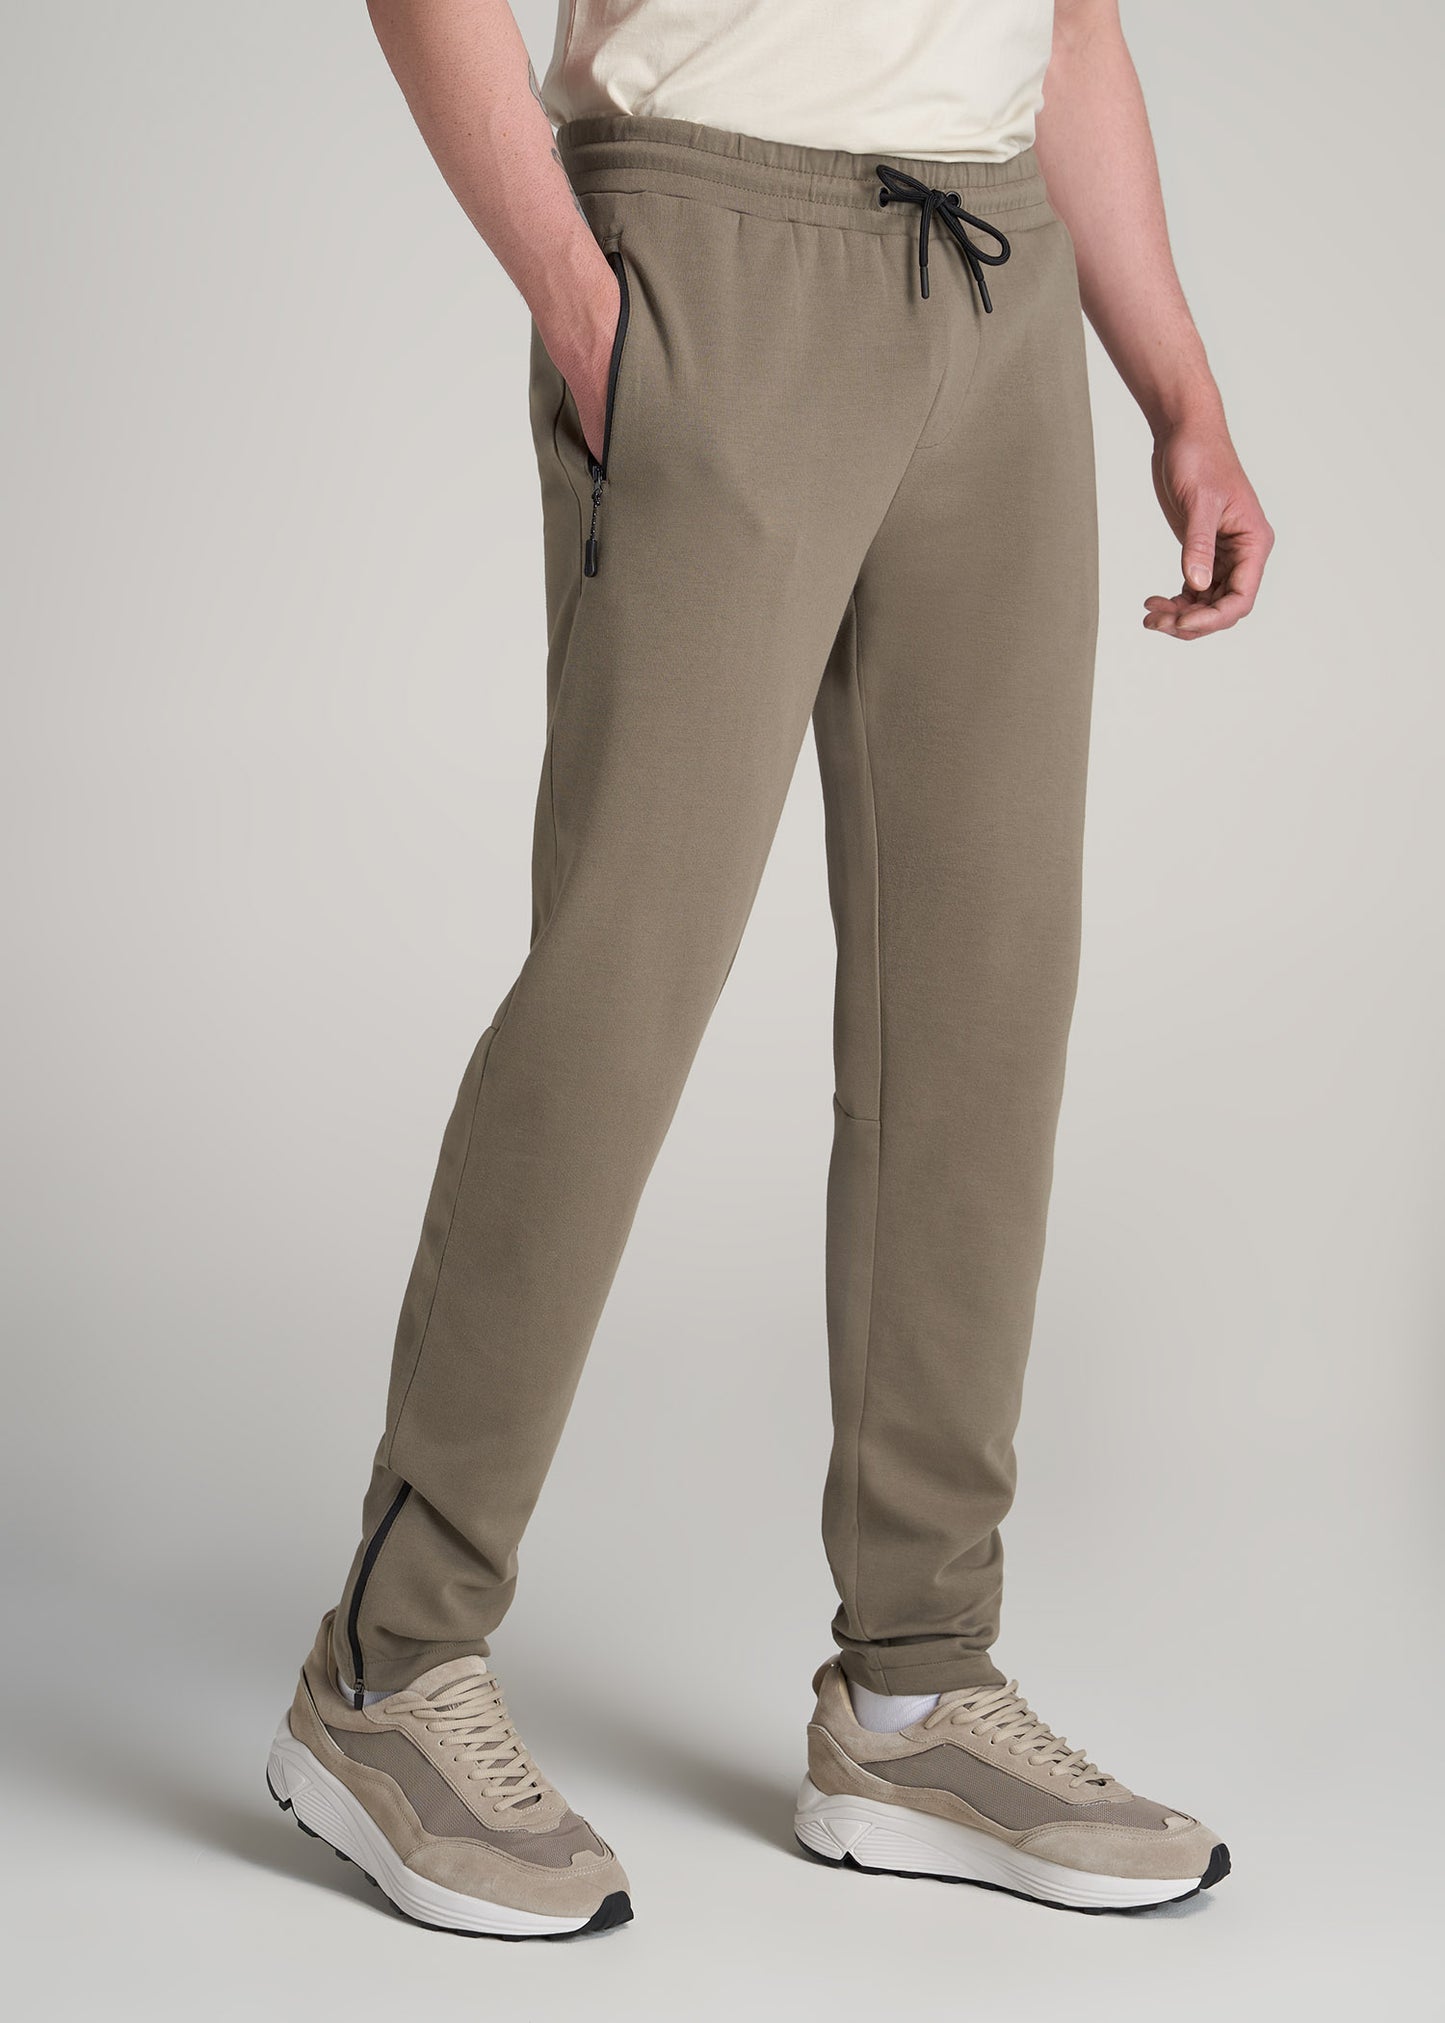     American-Tall-Men-Athleisure-Performance-Pant-Deep-Taupe-side